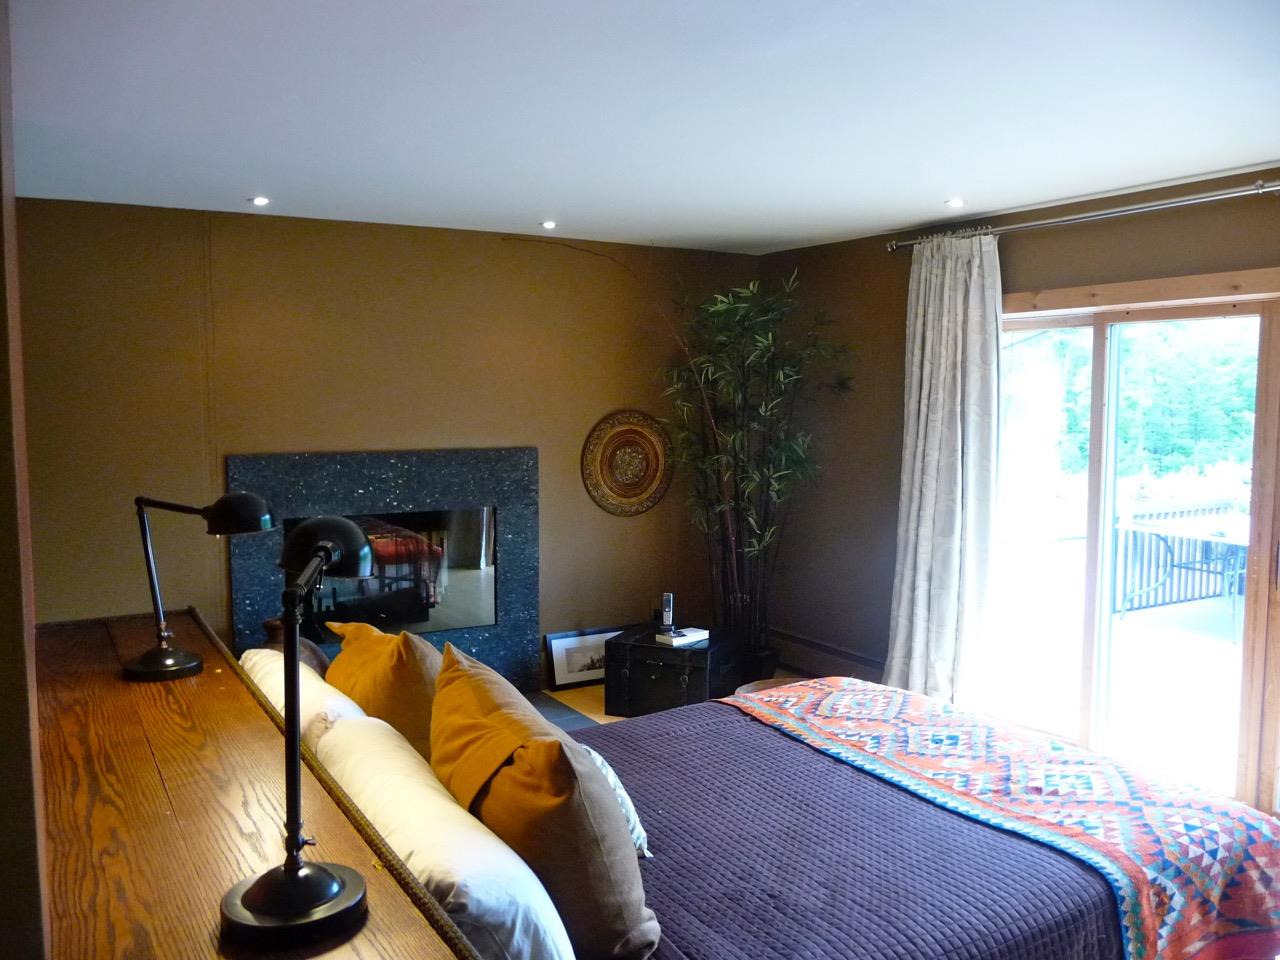 Country Master Bedroom Renovation After 3